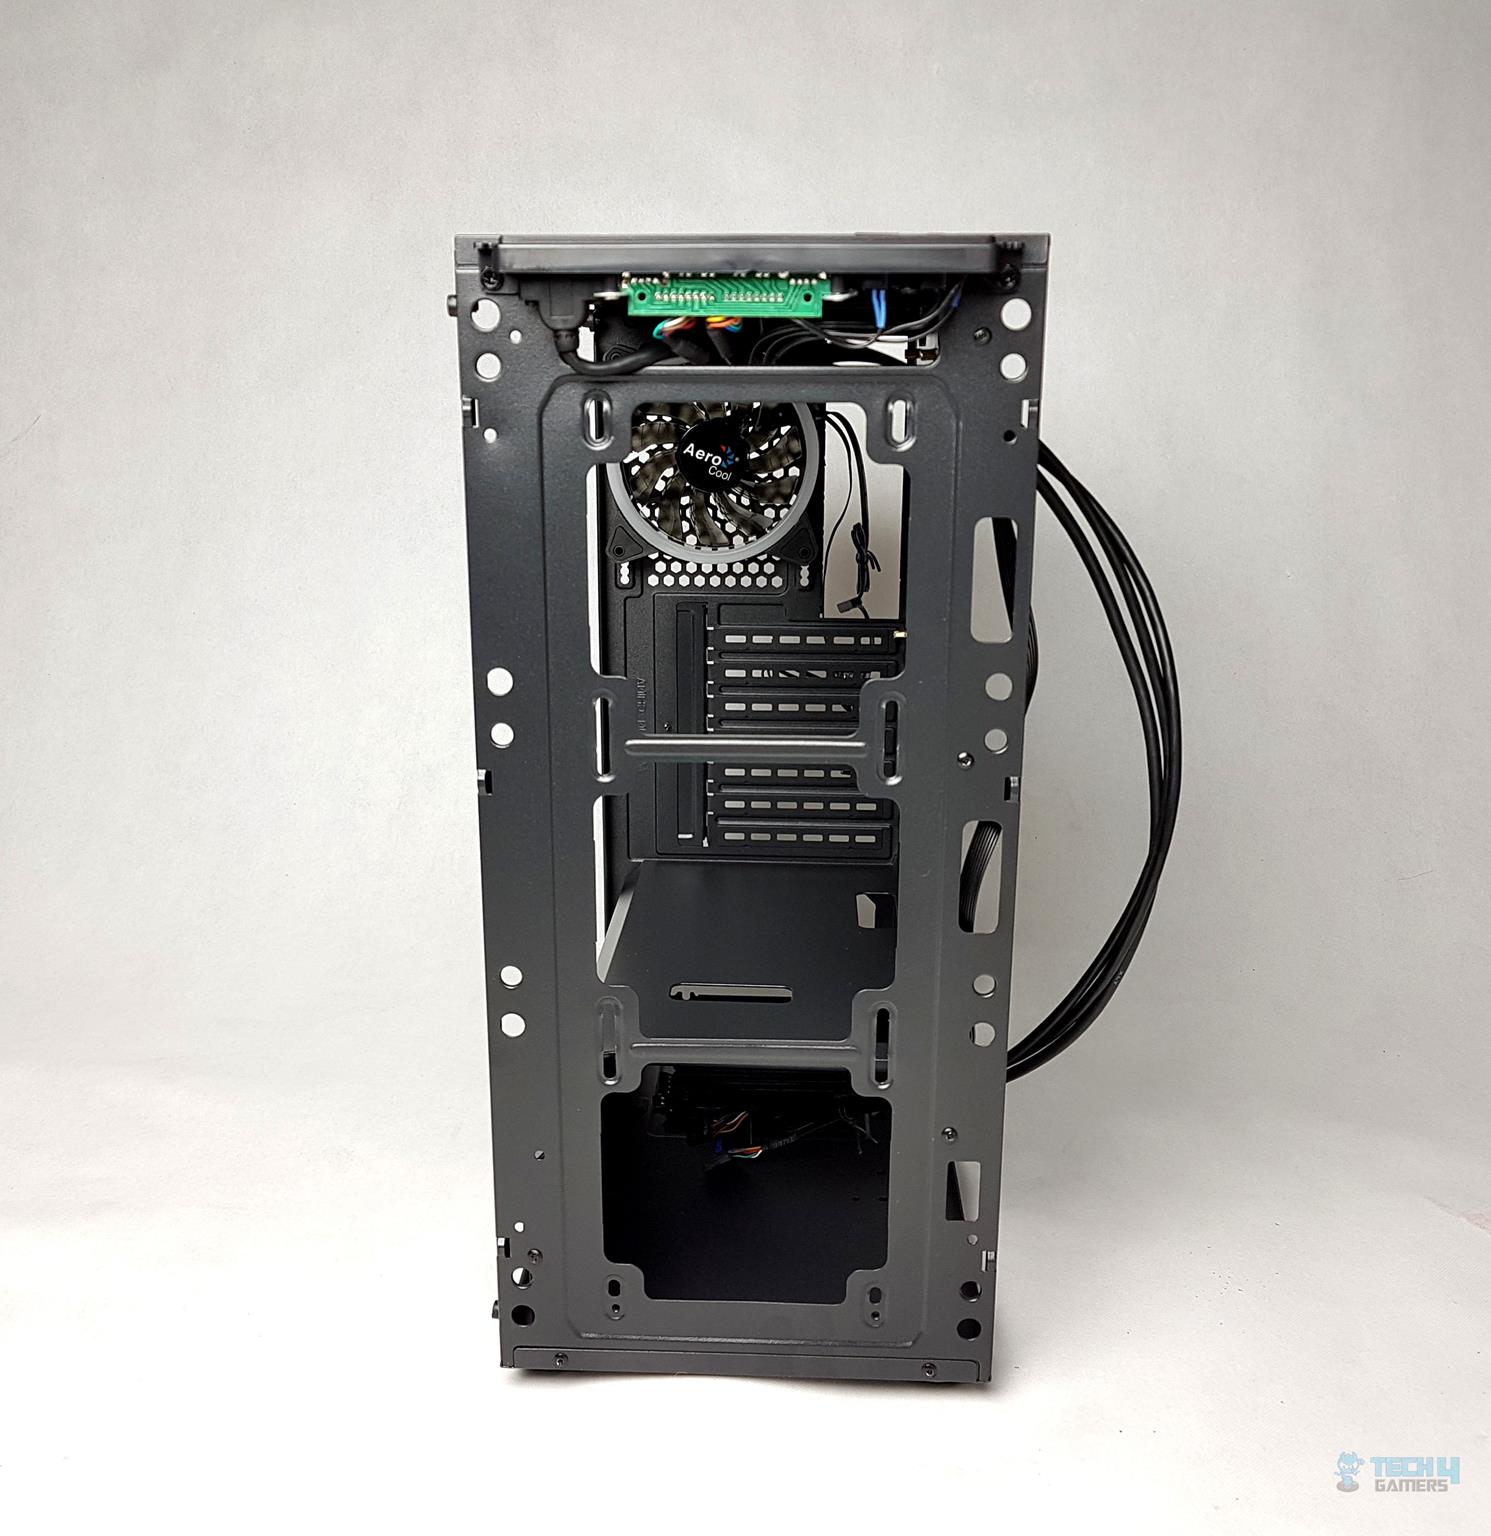  Aerocool Quartz Revo RGB Mid-Tower Chassis — The front side without the fans